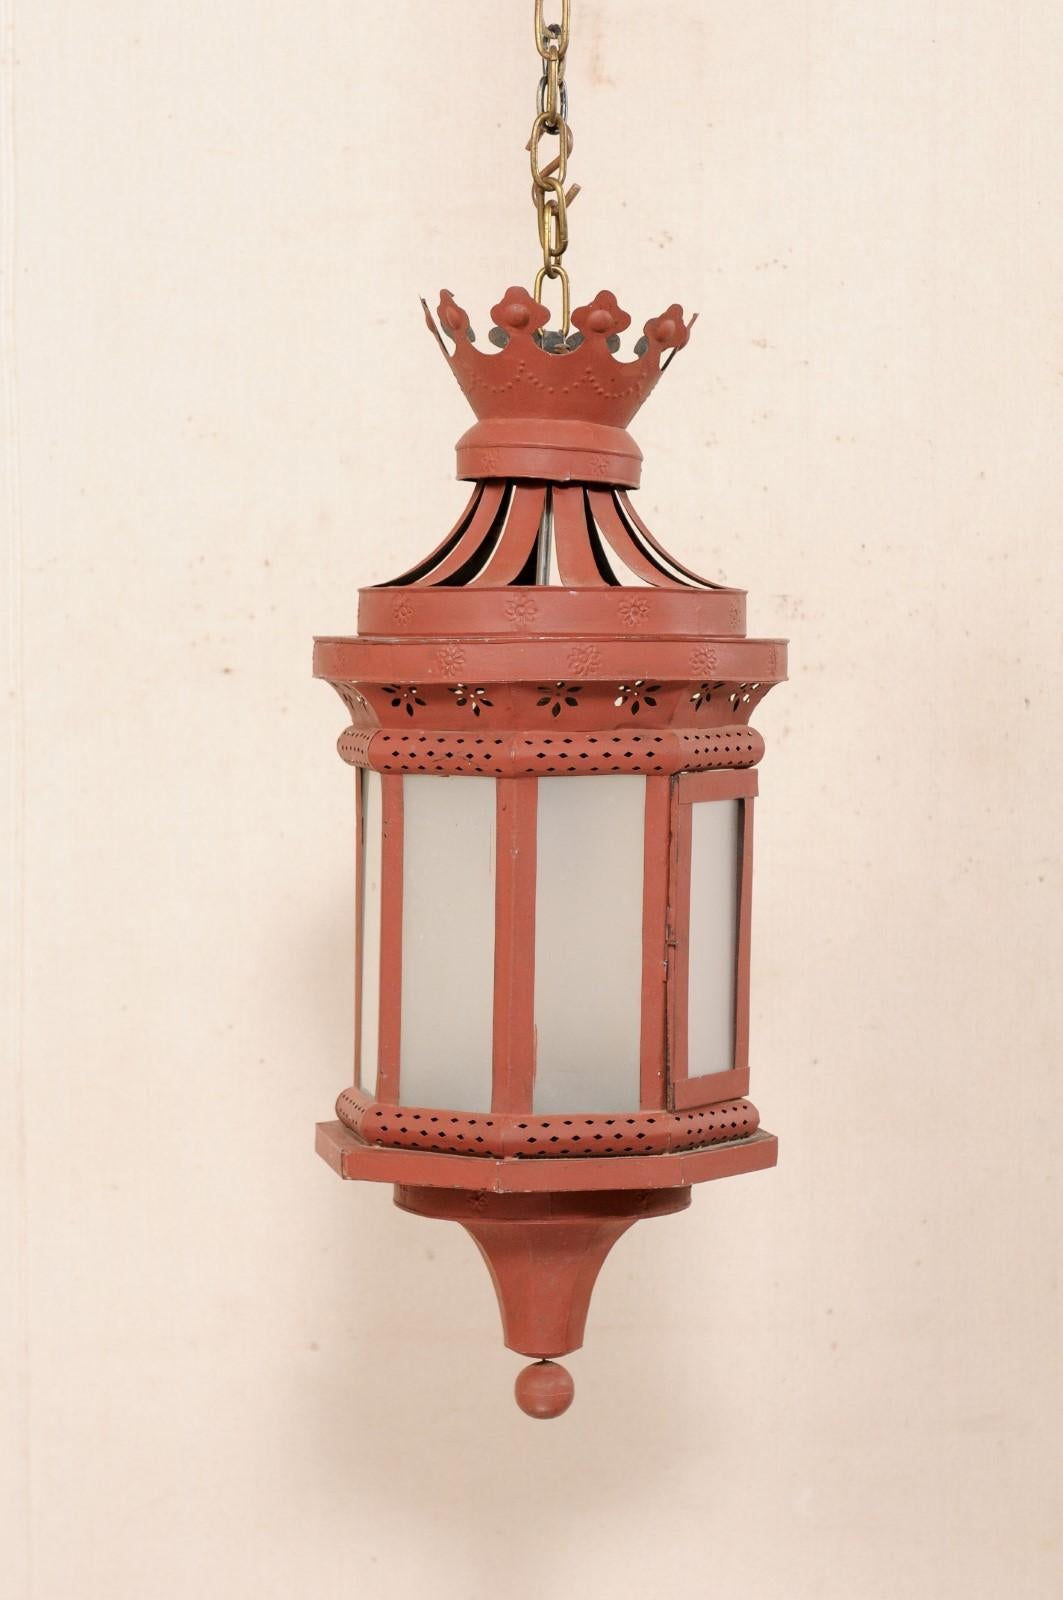 An Italian red tôle lantern from the early 20th century. This antique lantern from Italy has a cut crown adorning its top, adorn with embossed swags and florals, with lantern beneath decorated with pierced cut-outs in a petite diamond and flower